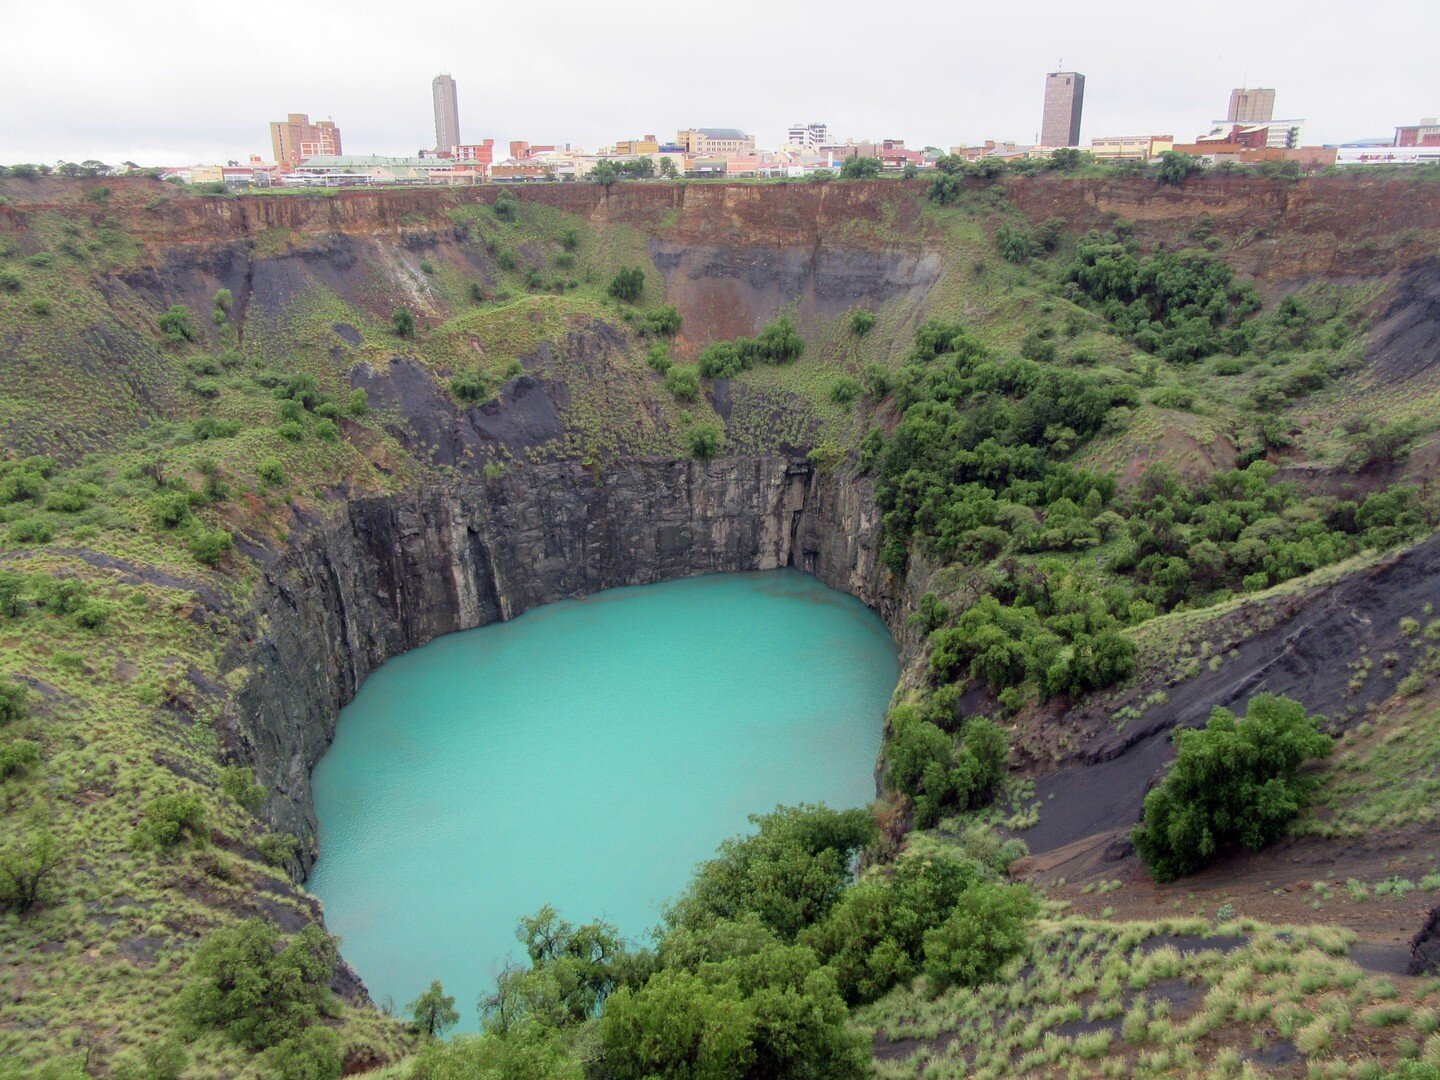 The Kimberley Mine (also known as the Big Hole) is an open-pit and underground mine in Kimberley, South Africa, and is claimed to be the deepest hole excavated by hand.

📍 Kimberley, South Africa
📸 Amanda

#bighole #kimberleymine #mine #kimberley #